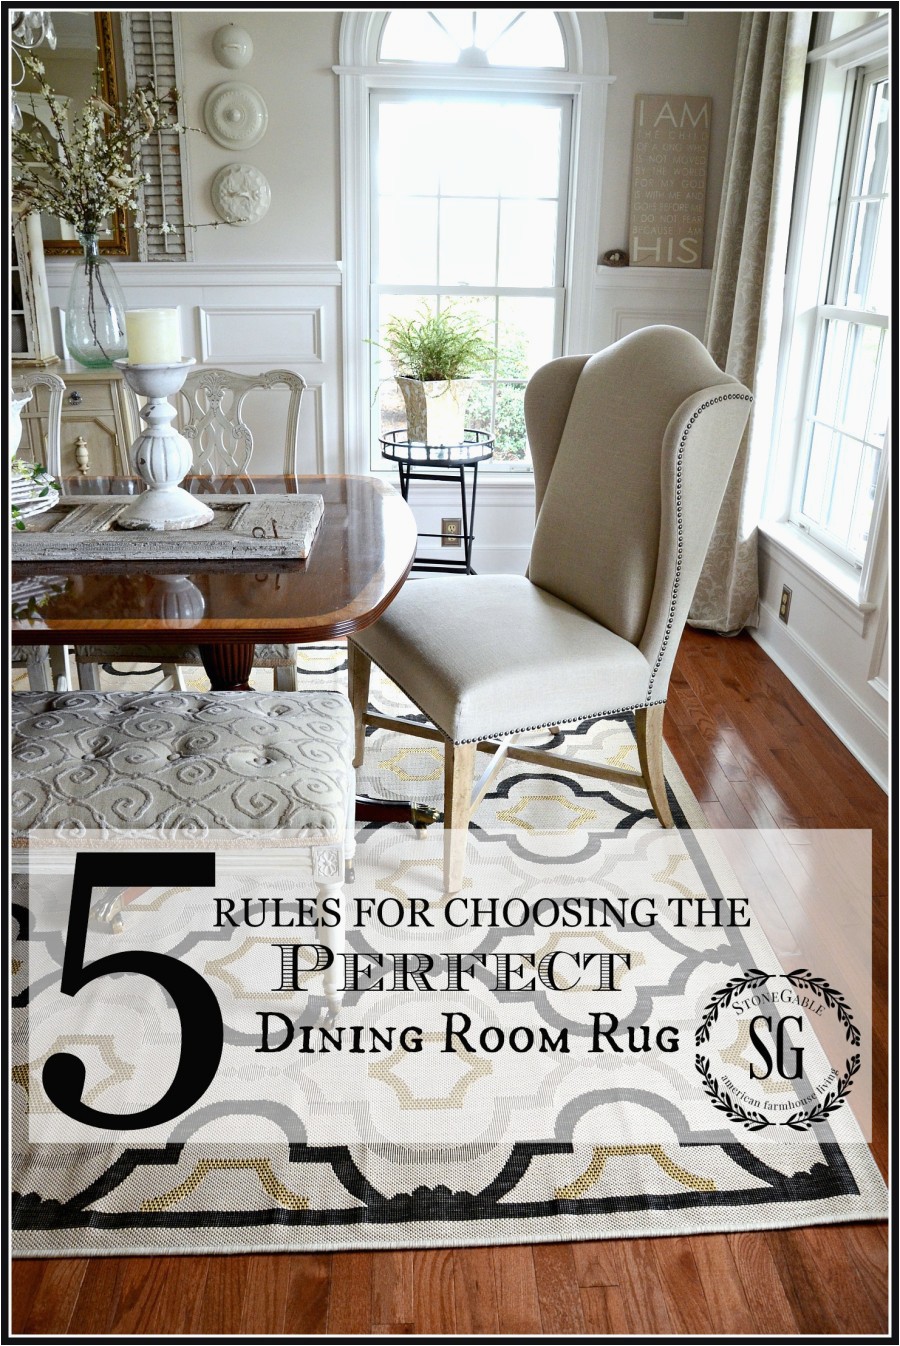 5 RULES FOR CHOOSING THE PERFECT DINING ROOM RUG No nonsense sensibe advice for choosing the right rug stonegableblog